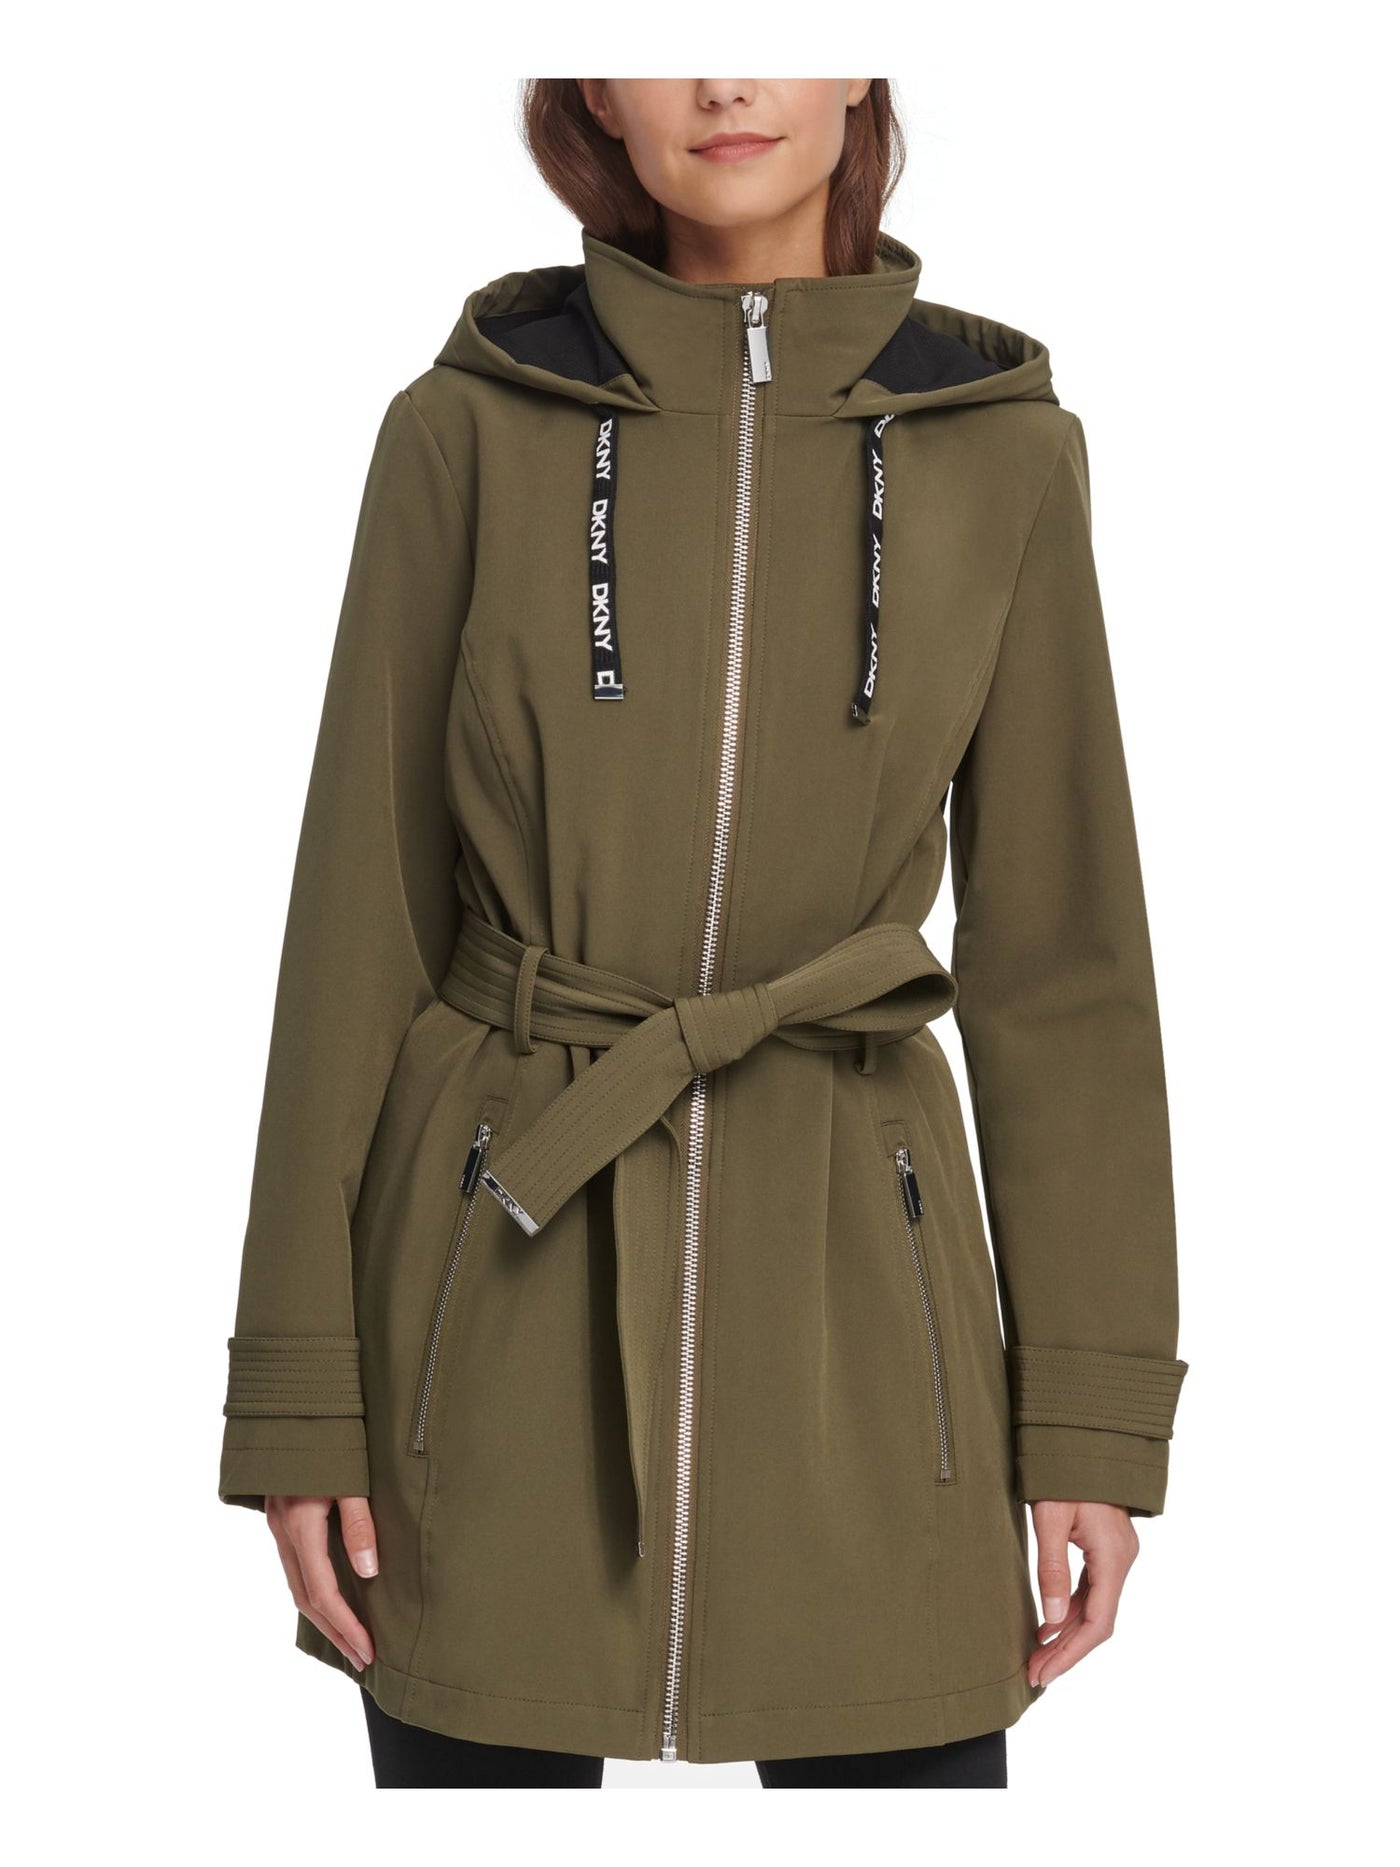 DKNY Womens Green Pocketed Zippered Hooded Water-resistant Raincoat M